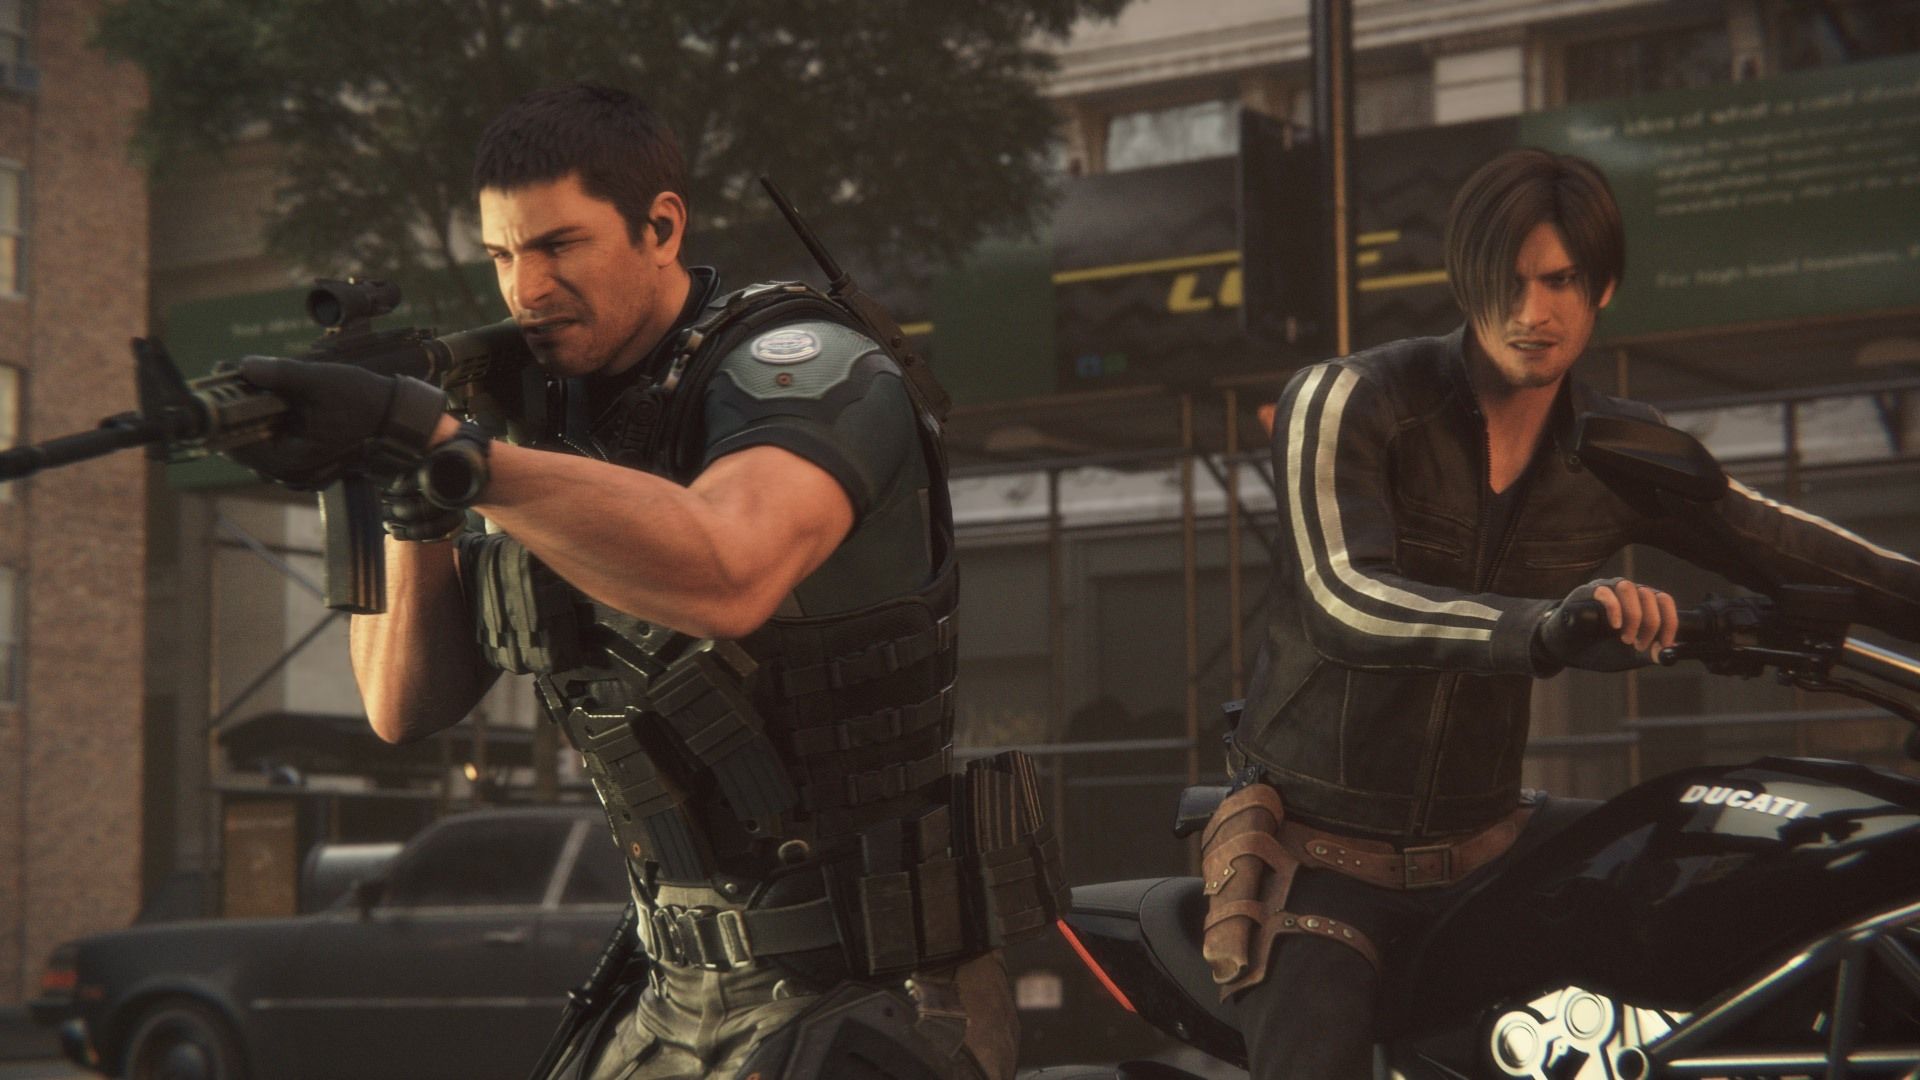 Resident Evil: Vendetta coming to theaters